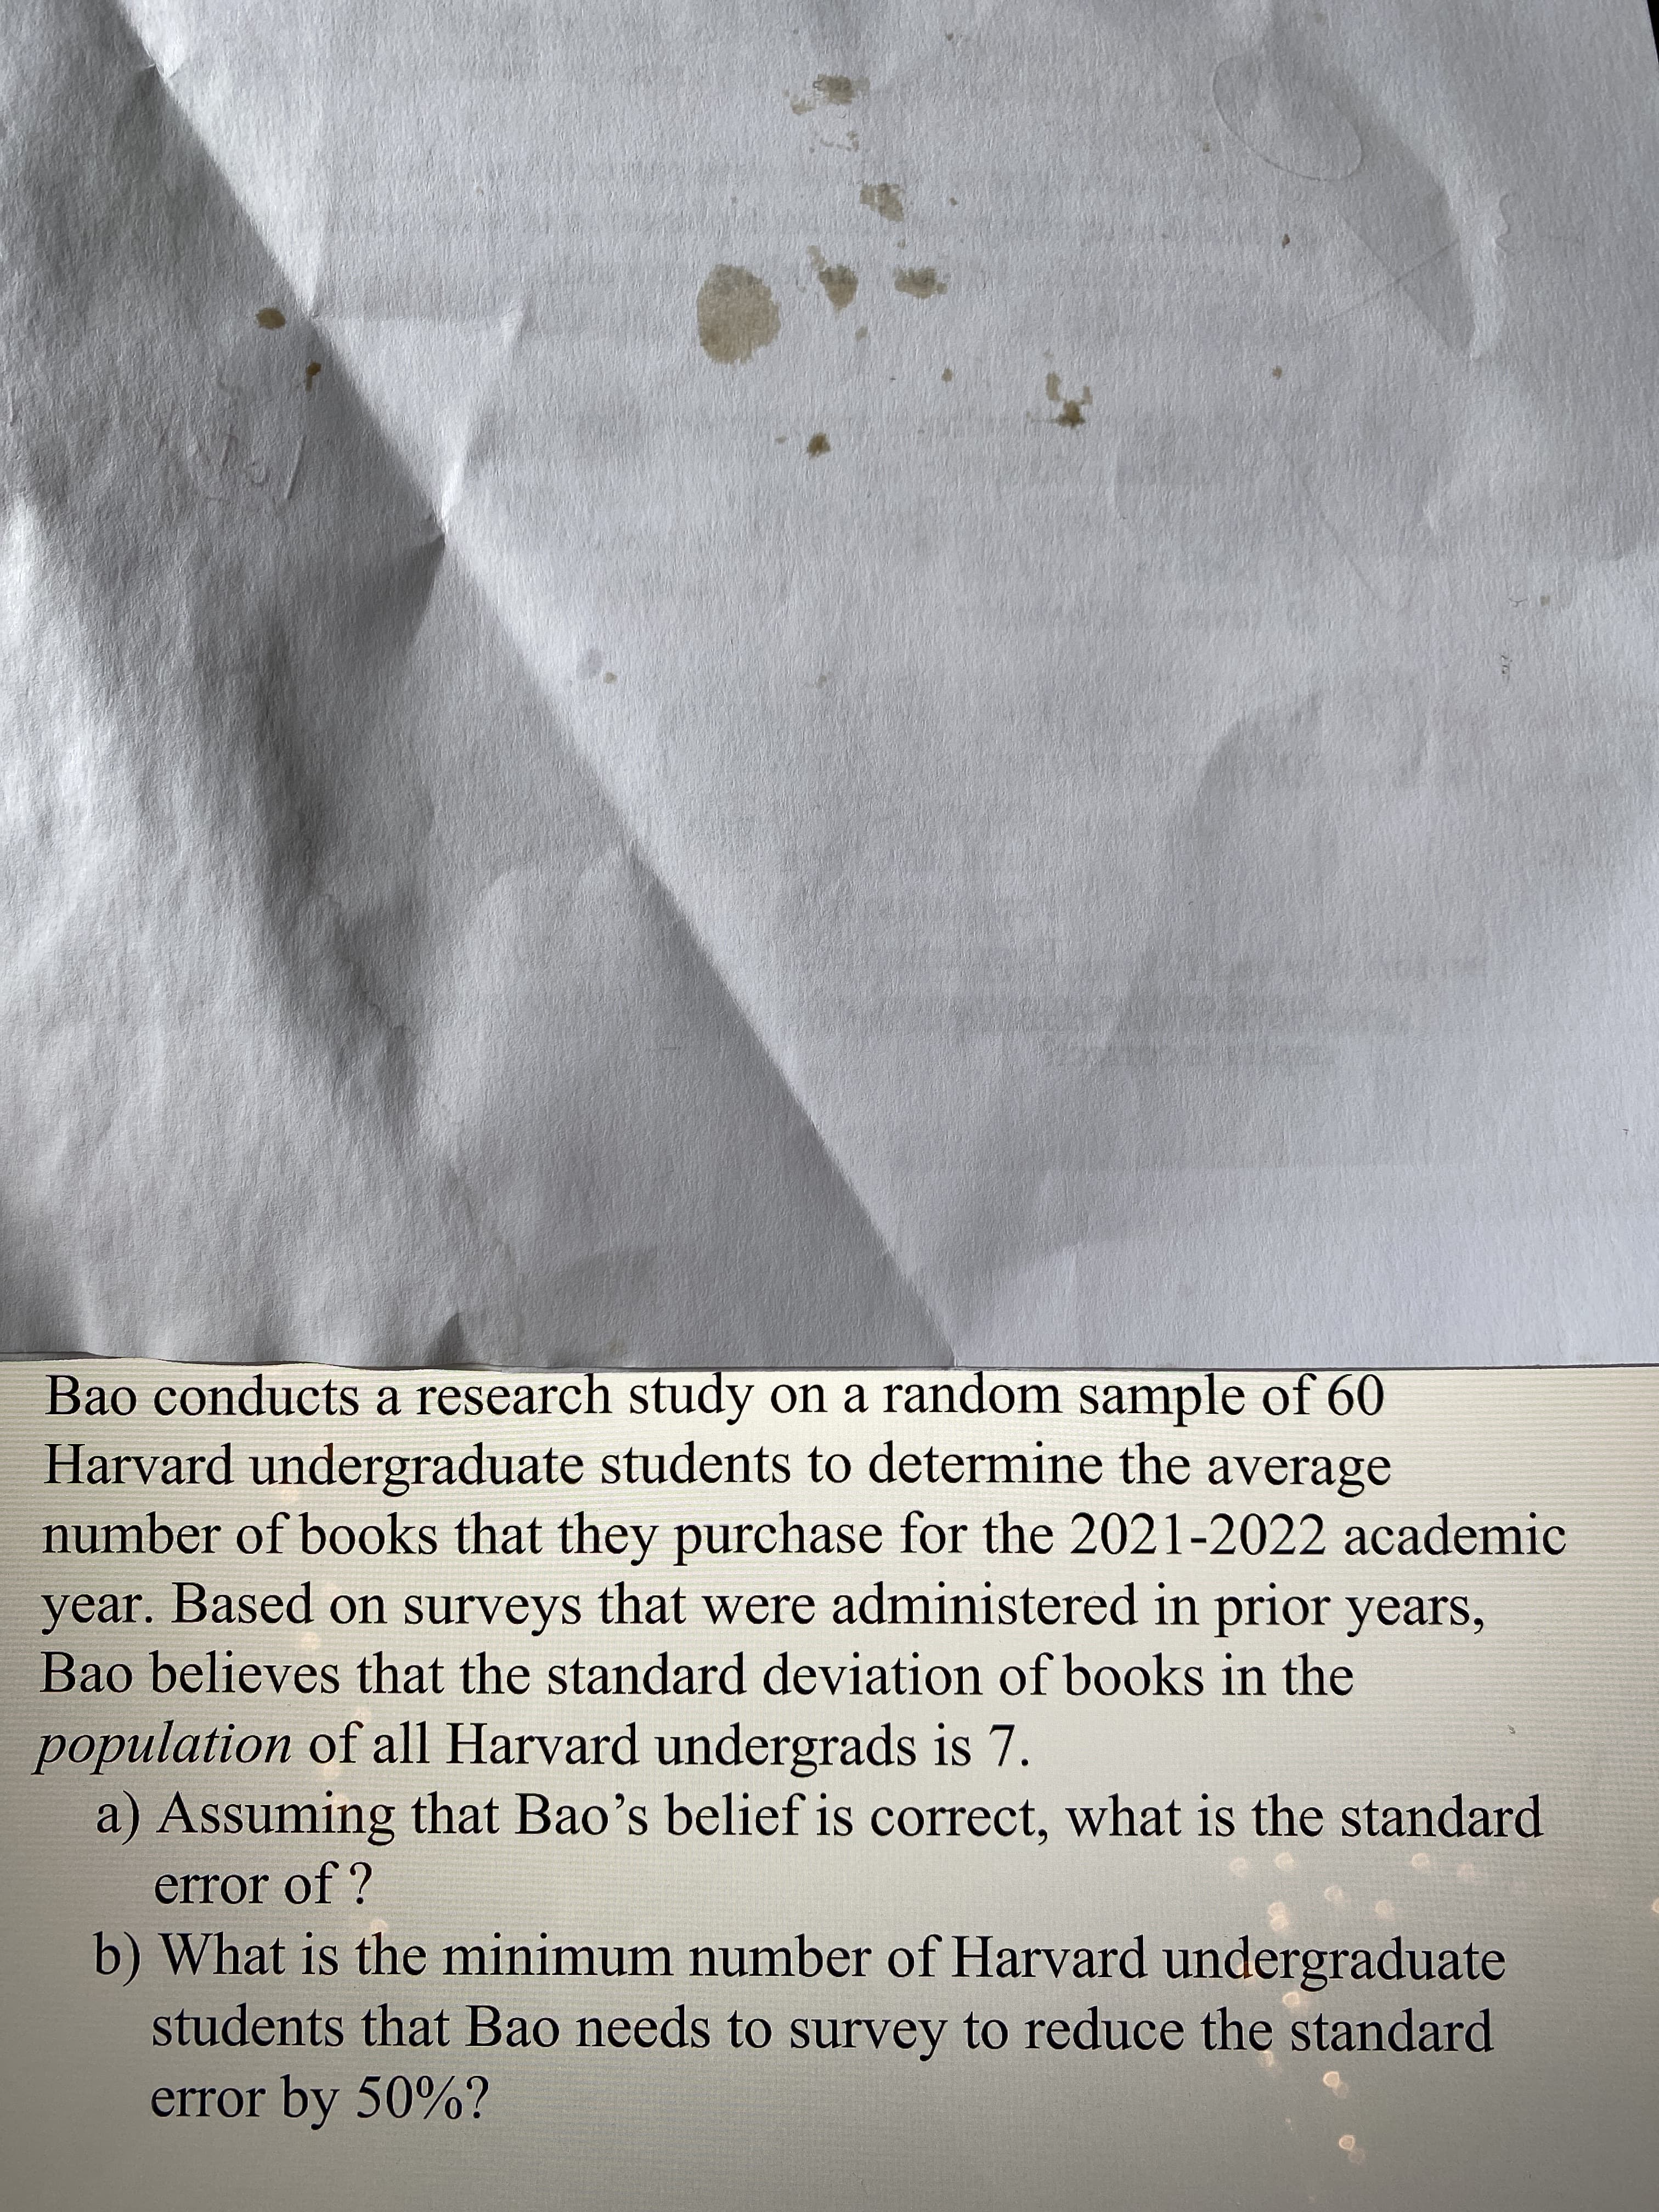 Bao conducts a research study on a random sample of 60
Harvard undergraduate students to determine the average
number of books that they purchase for the 2021-2022 academic
year. Based on surveys that were administered in prior years,
Bao believes that the standard deviation of books in the
population of all Harvard undergrads is 7.
a) Assuming that Bao's belief is correct, what is the standard
error of ?
b) What is the minimum number of Harvard undergraduate
students that Bao needs to survey to reduce the standard
error by 50%?
